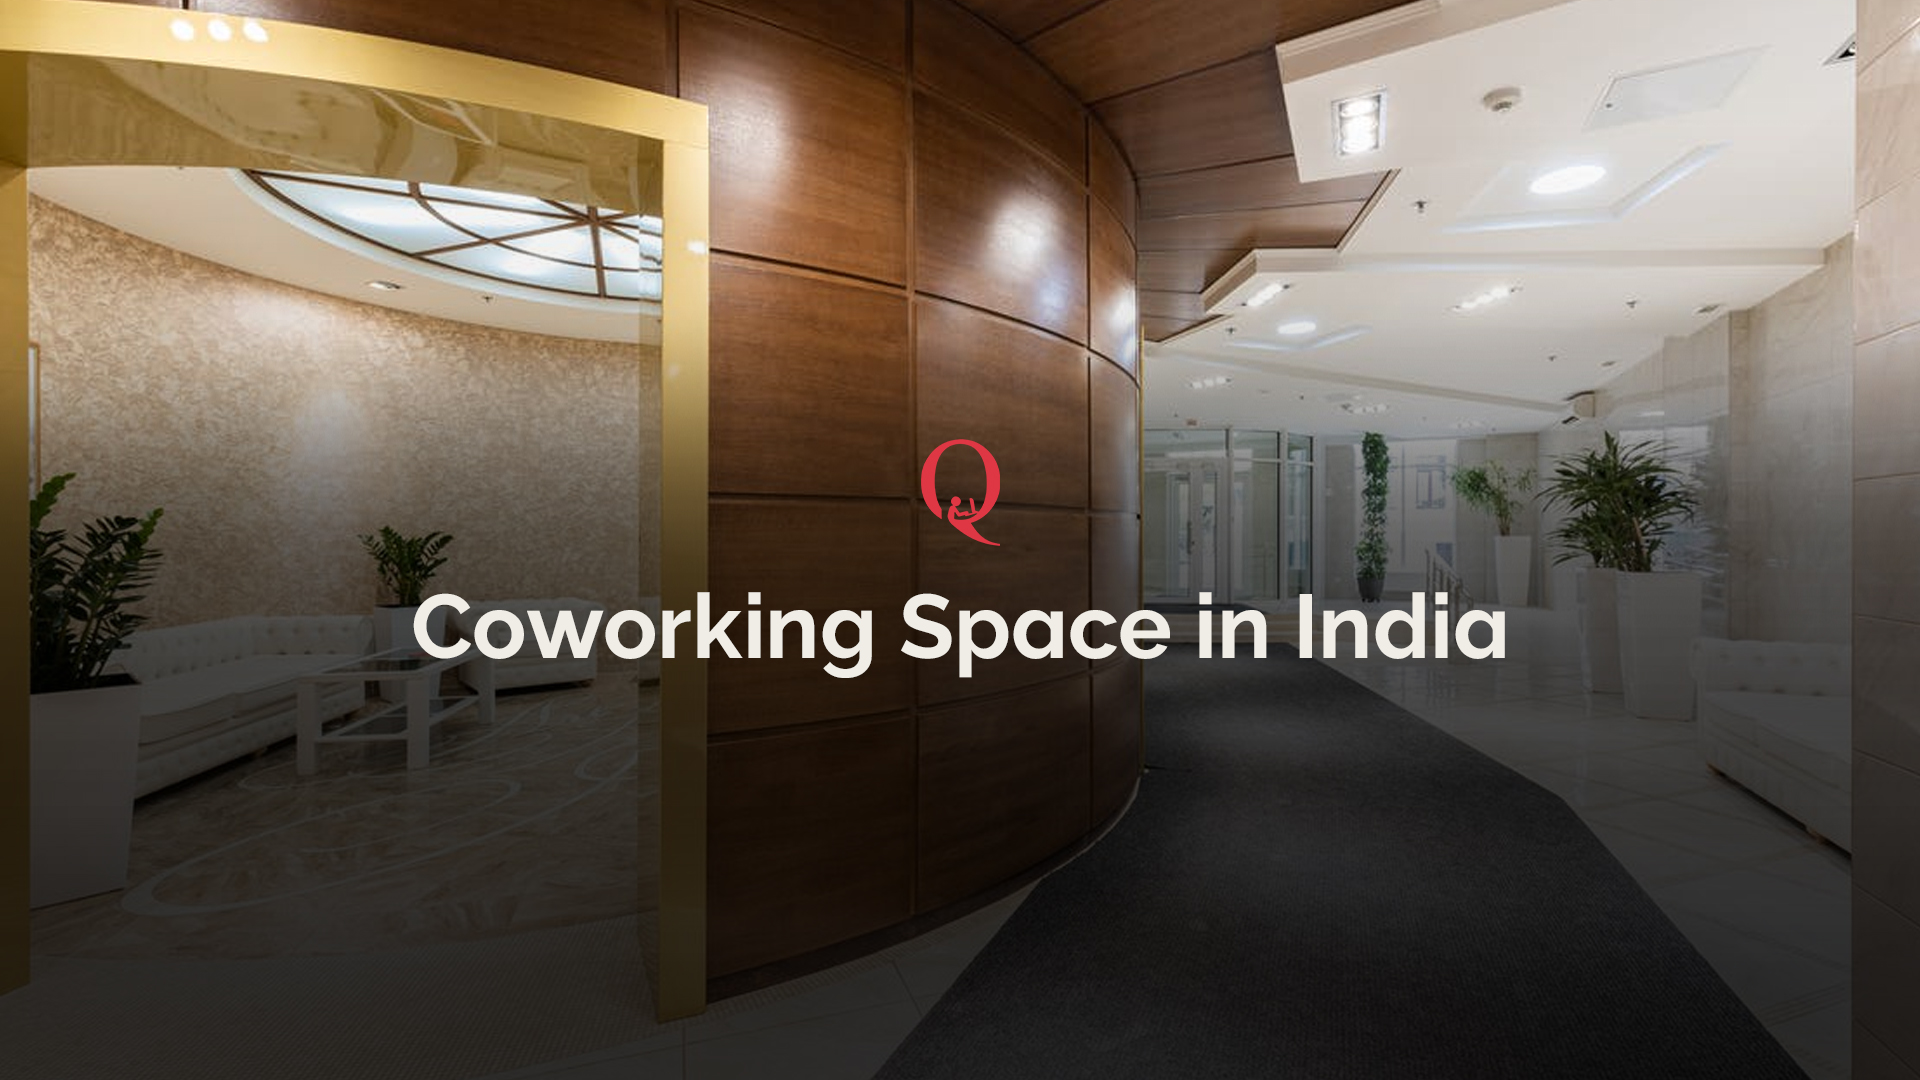 Coworking spaces in India